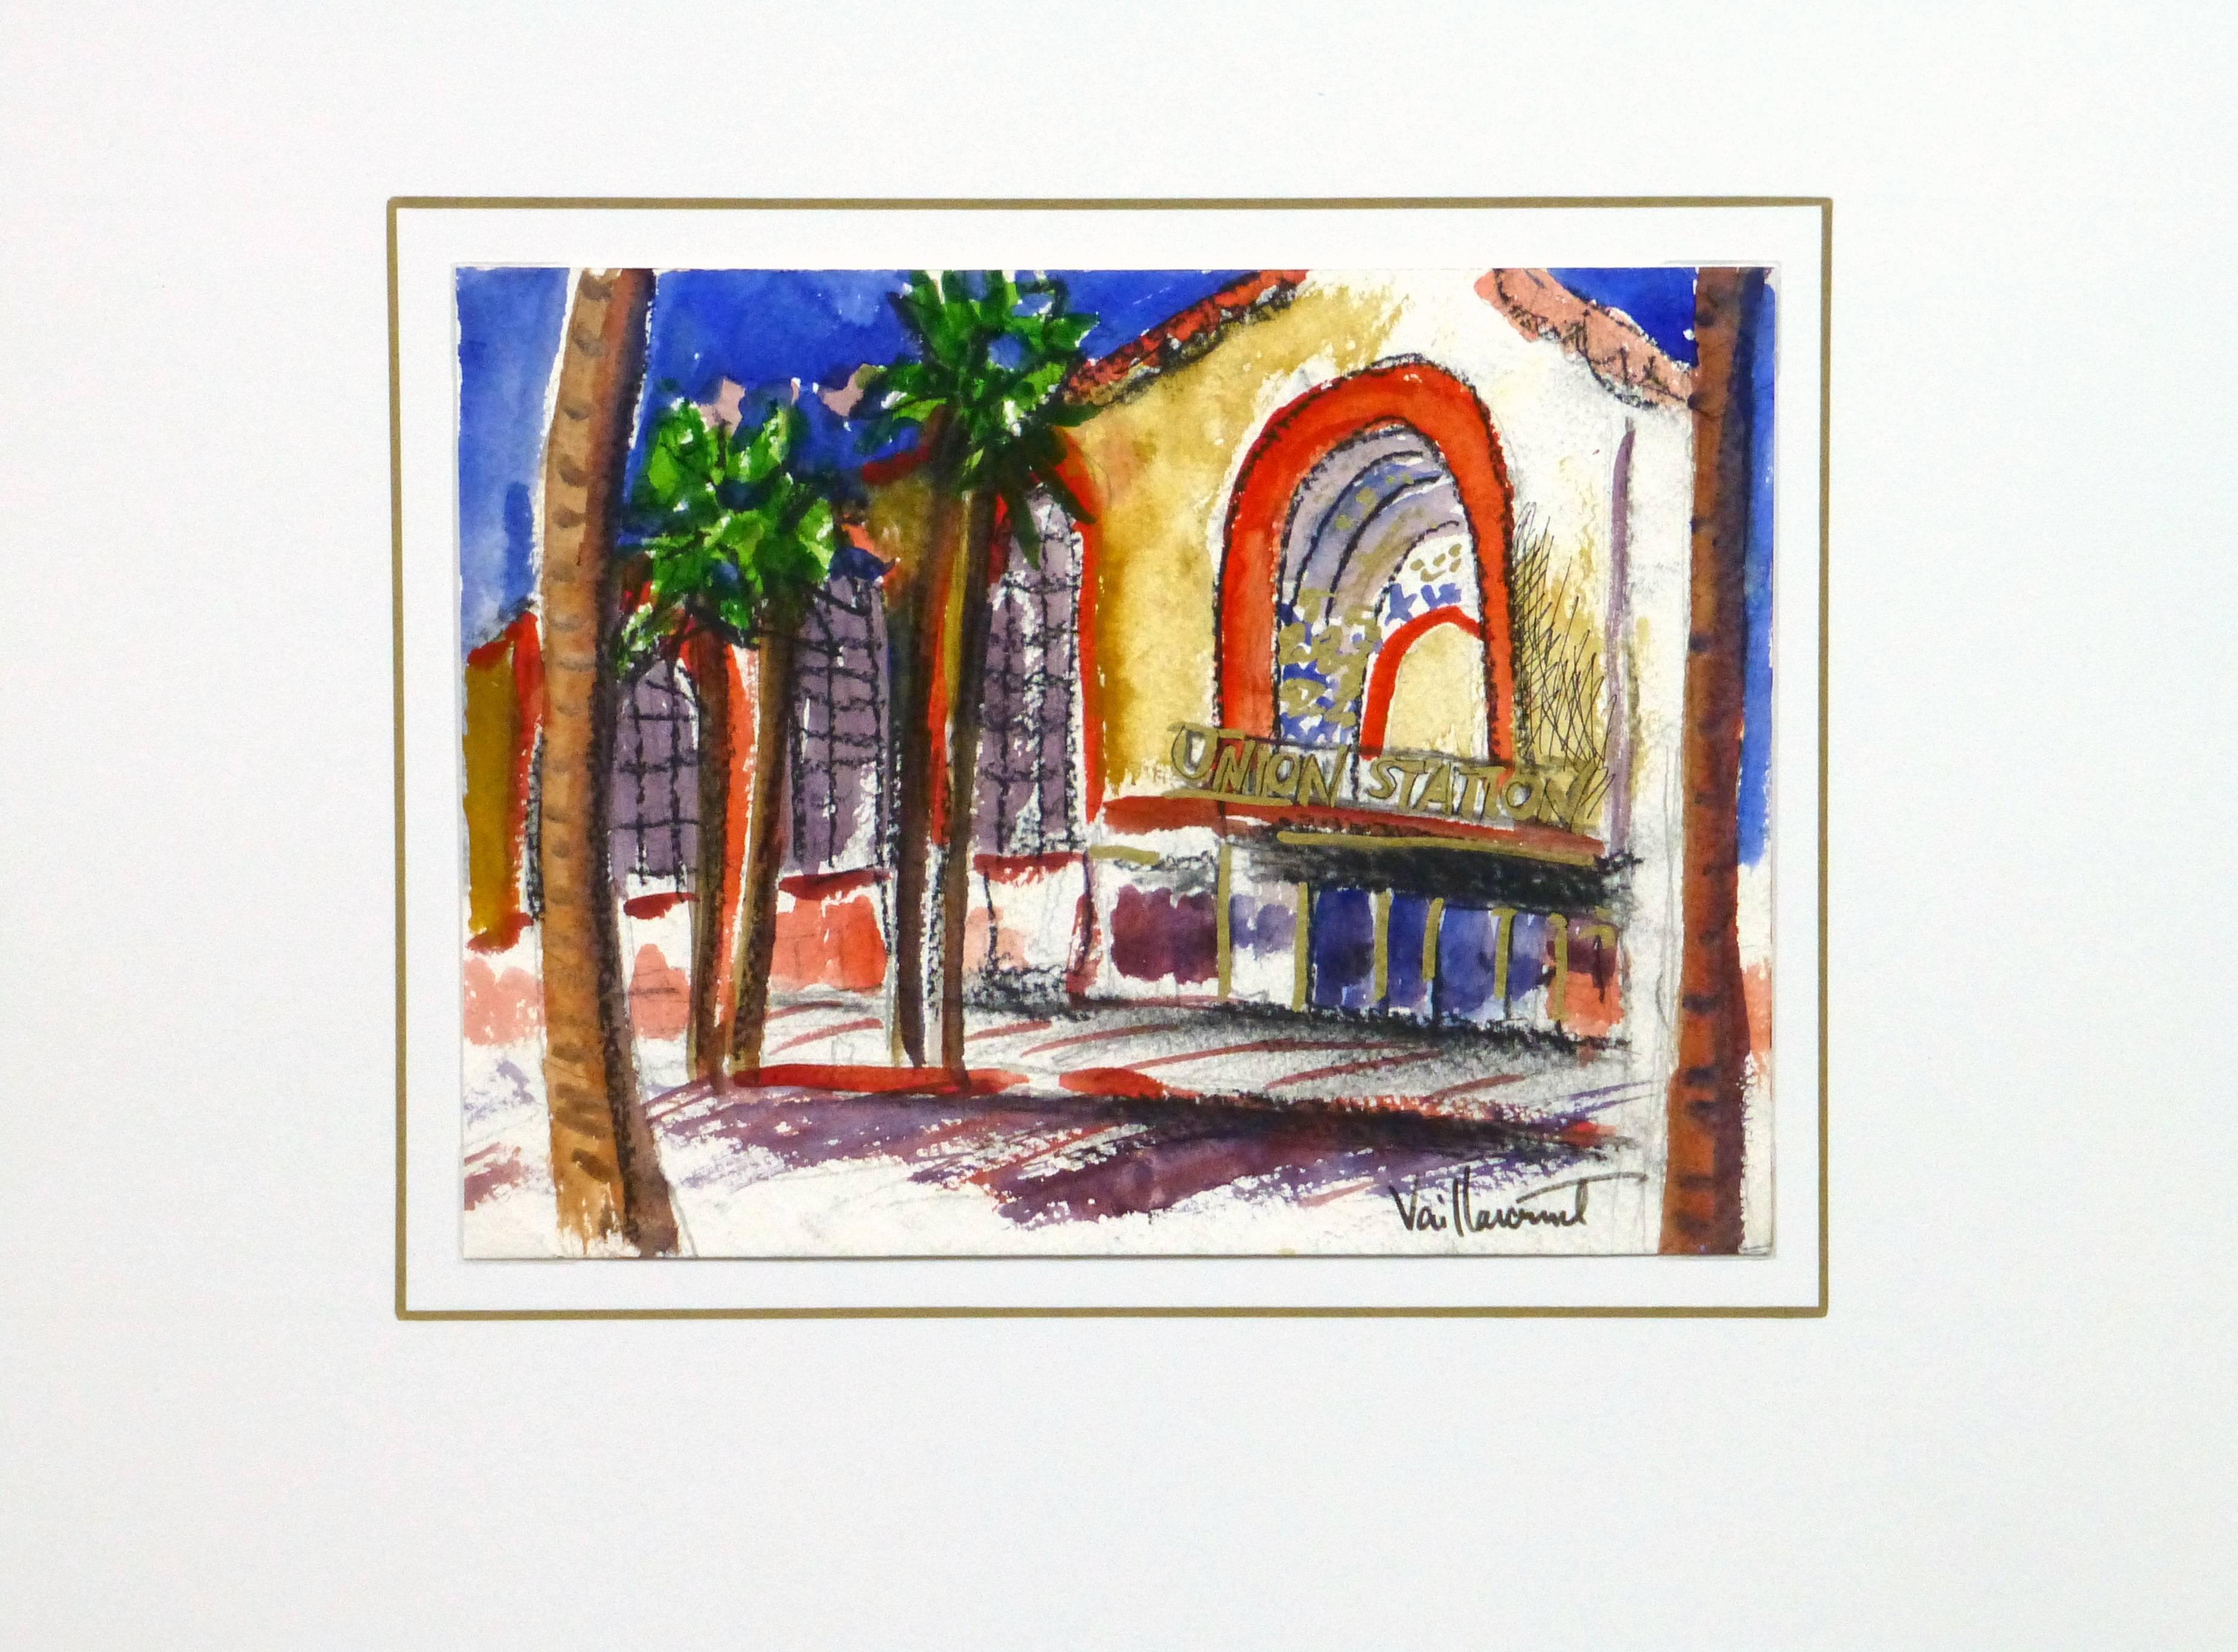 Vibrant and lively painting of the entrance to the iconic Union Station located in Los Angeles, California by artist S. Vaillancourt, 2008. Signed lower right. 

Original artwork on paper displayed on a white mat with a gold border. Archival plastic